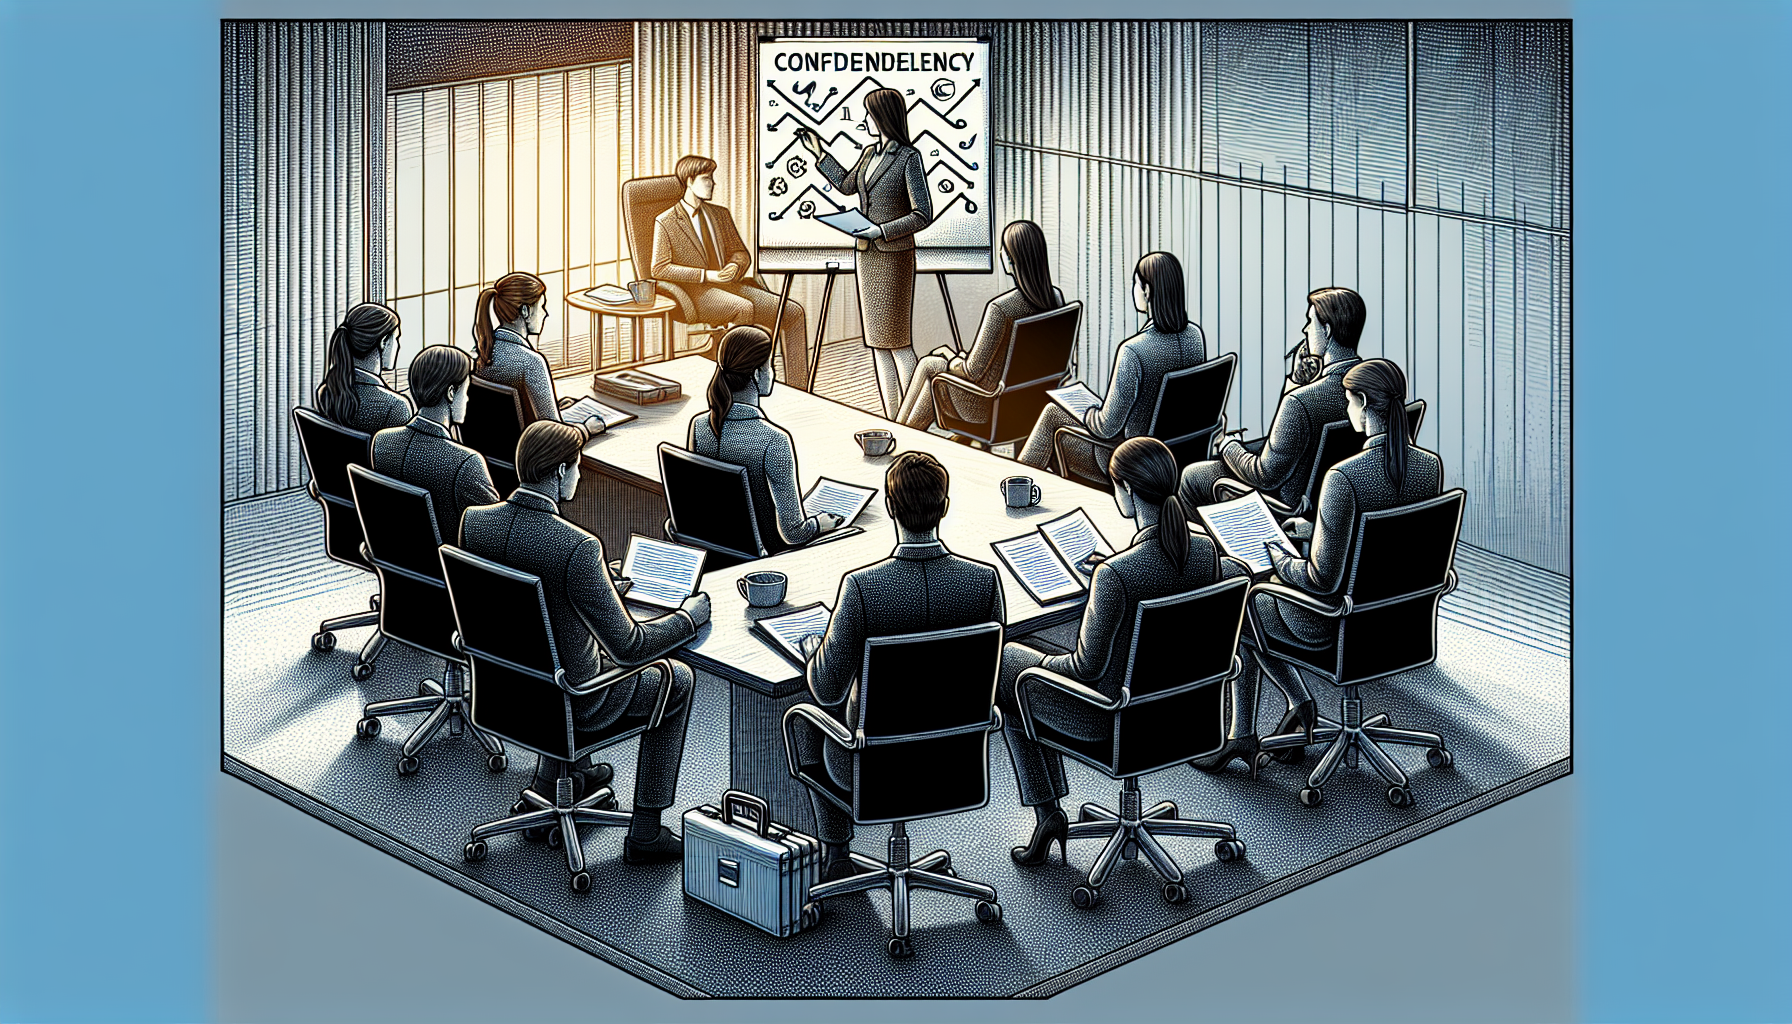 Illustration of a group of employees in a training session on confidentiality policies